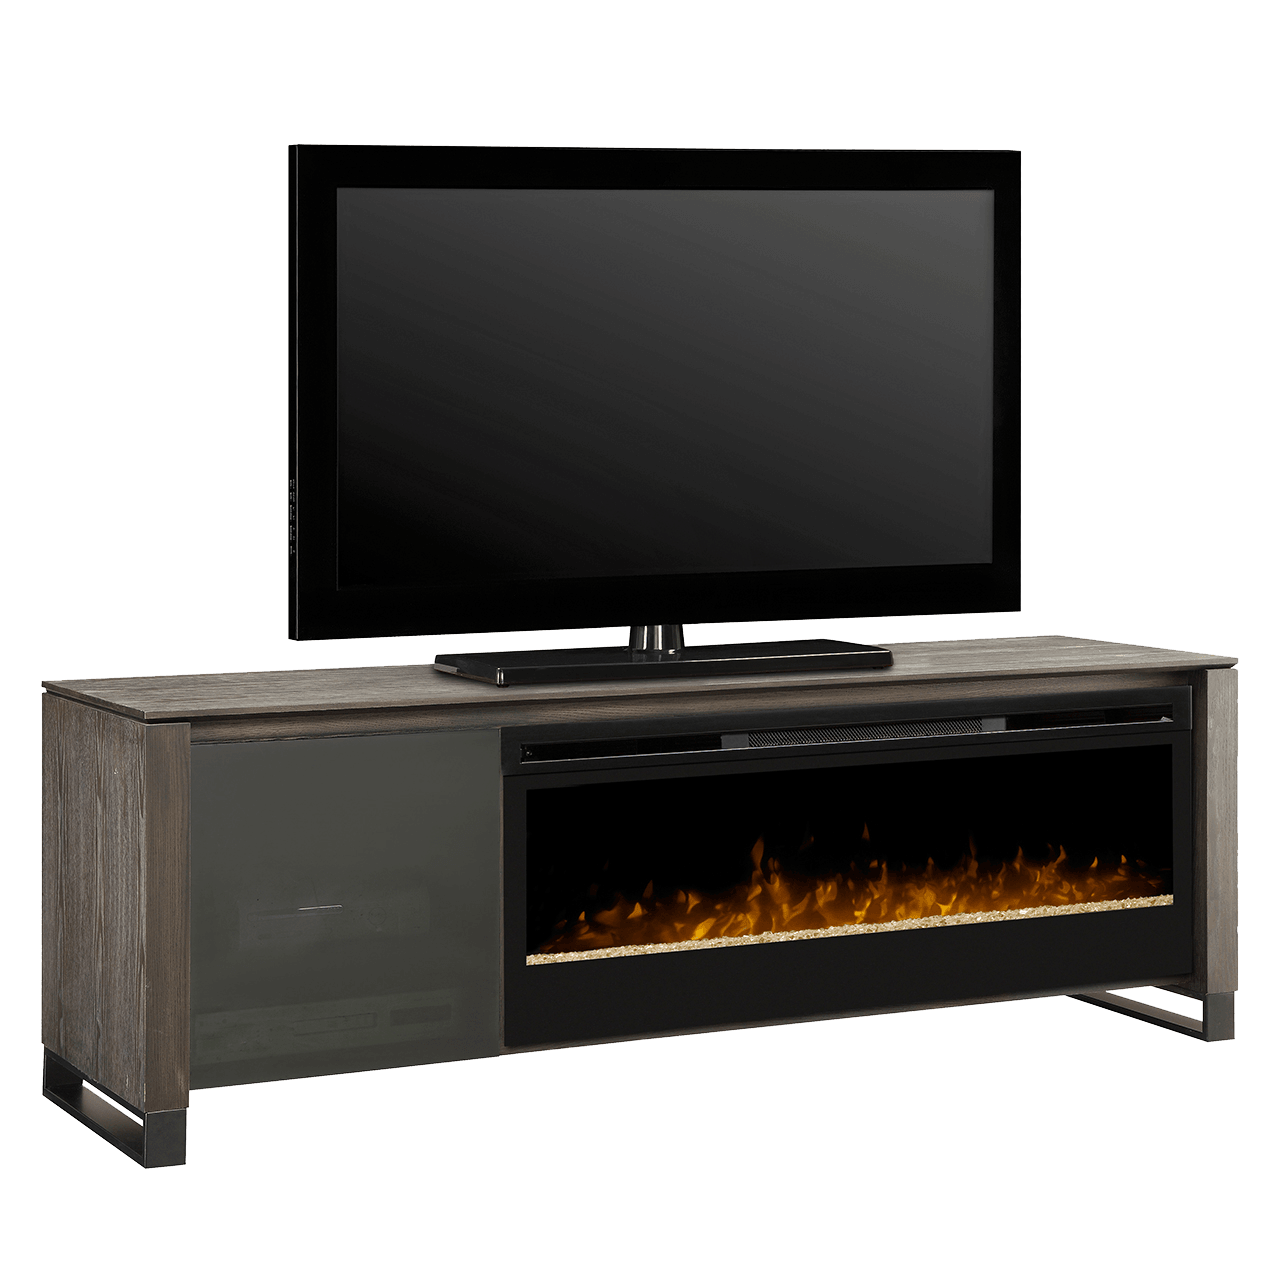 Dimplex Fireplace Tv Stand Inspirational Media Console Fireplace Charming Fireplace